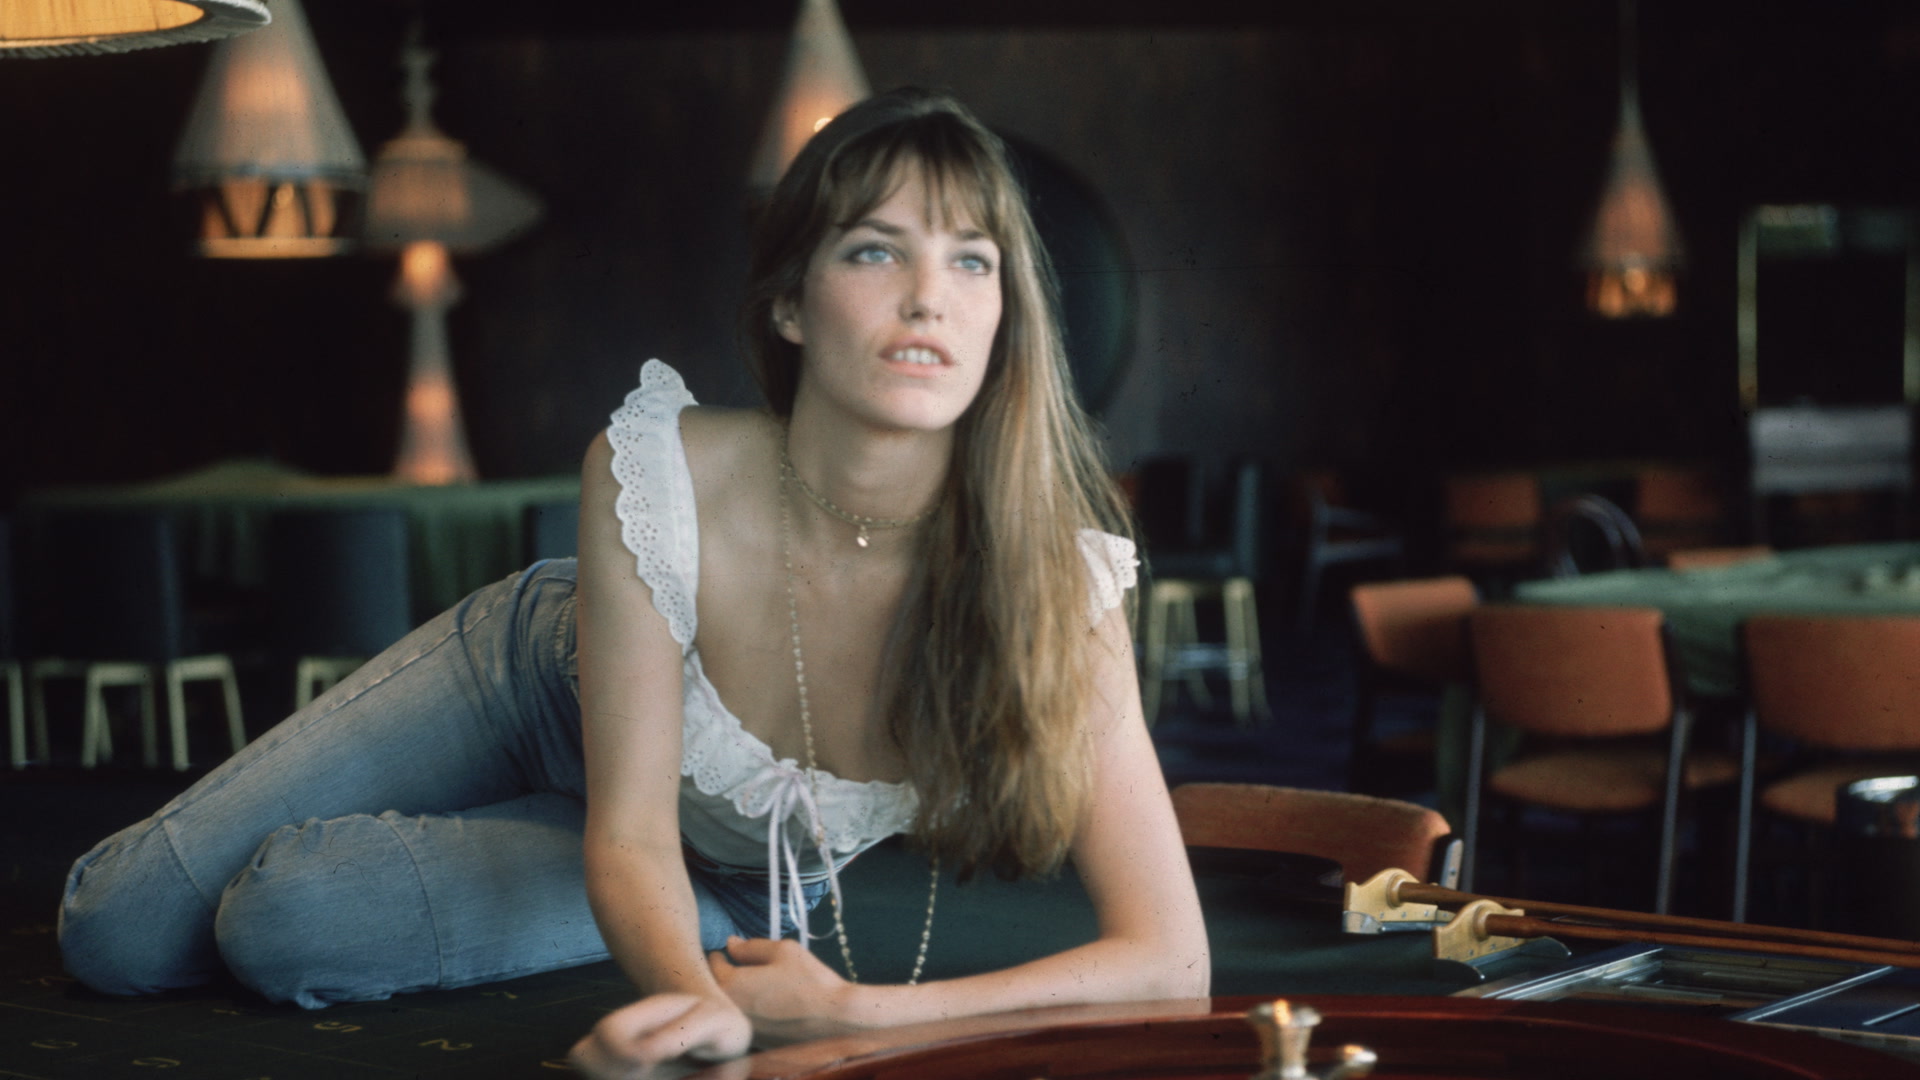 After Jane Birkin's Death, the Value of Her Namesake Hermès Bags Will Live  On - Barrons